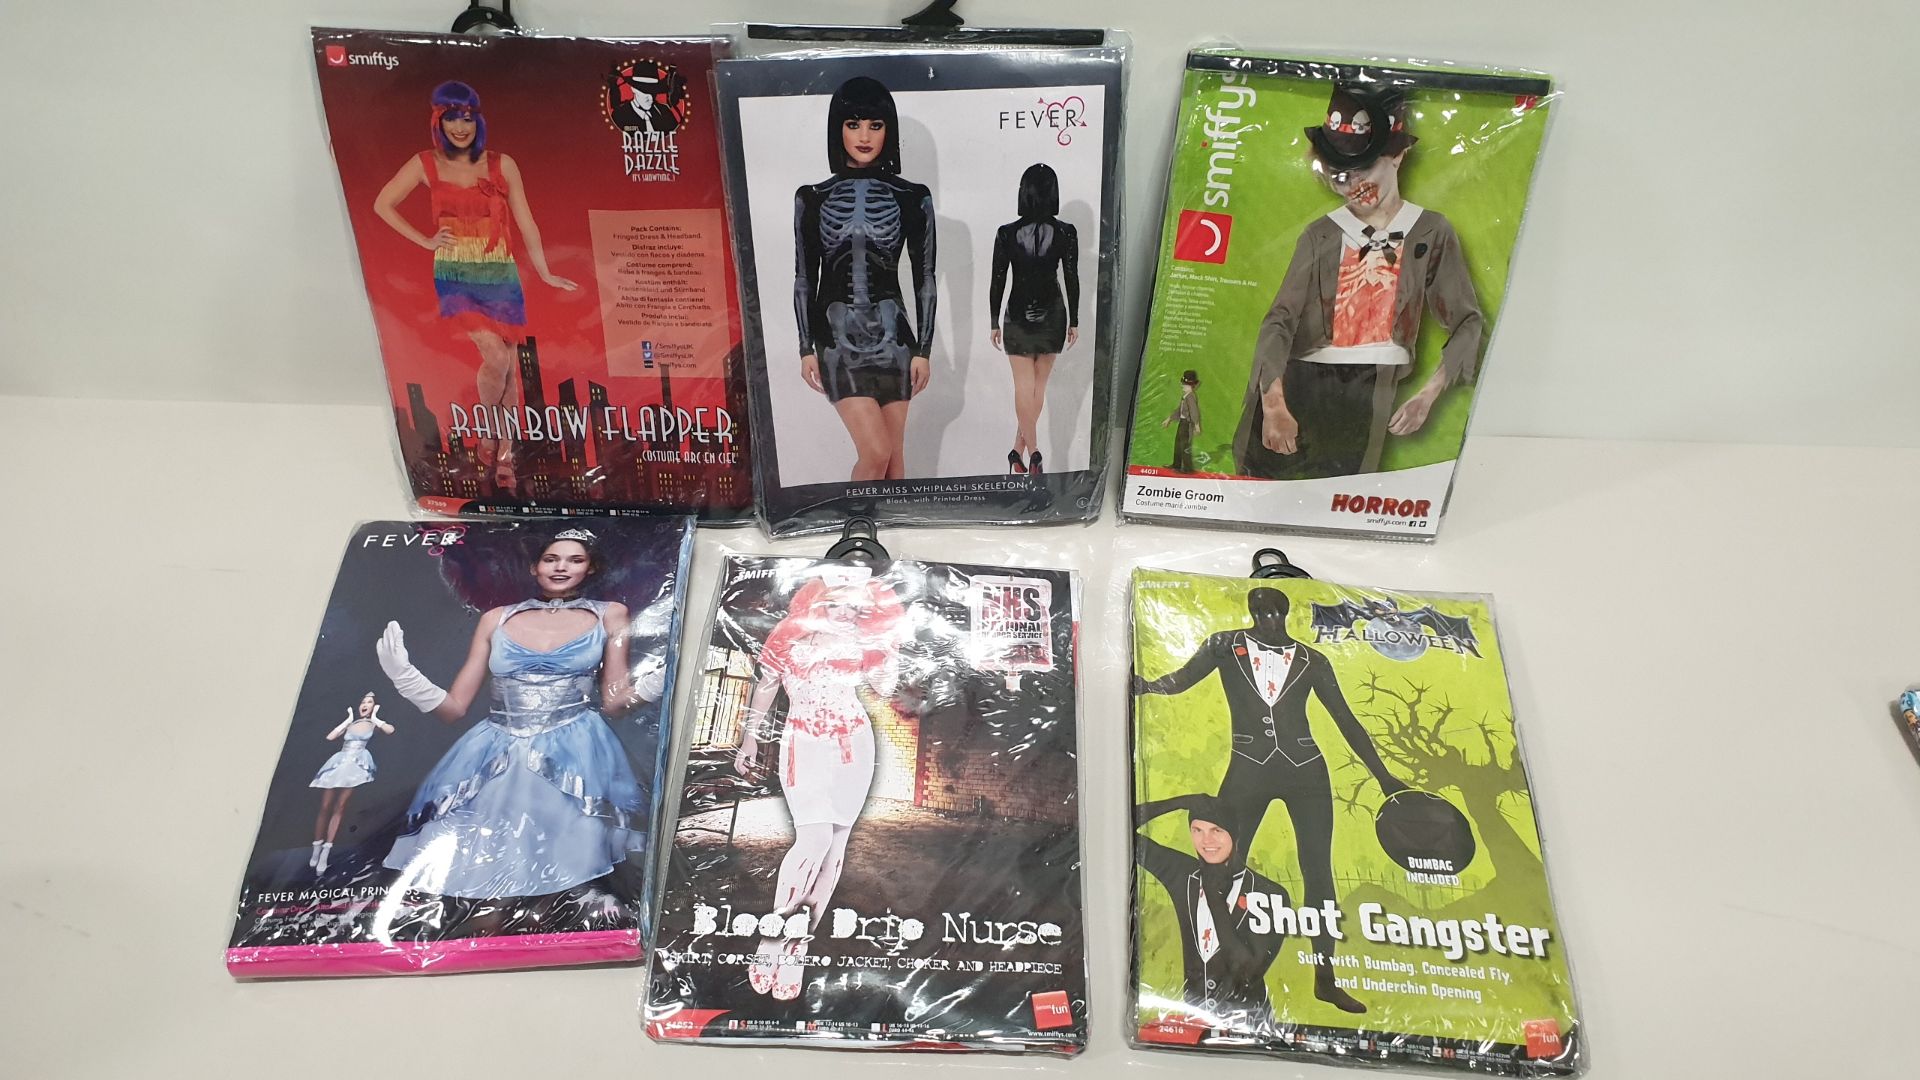 48 X BRAND NEW FANCY DRESS COSTUMES IE. SMIFFYS, FEVER - IN ASSORTED DESIGNS / THEMES - IN 2